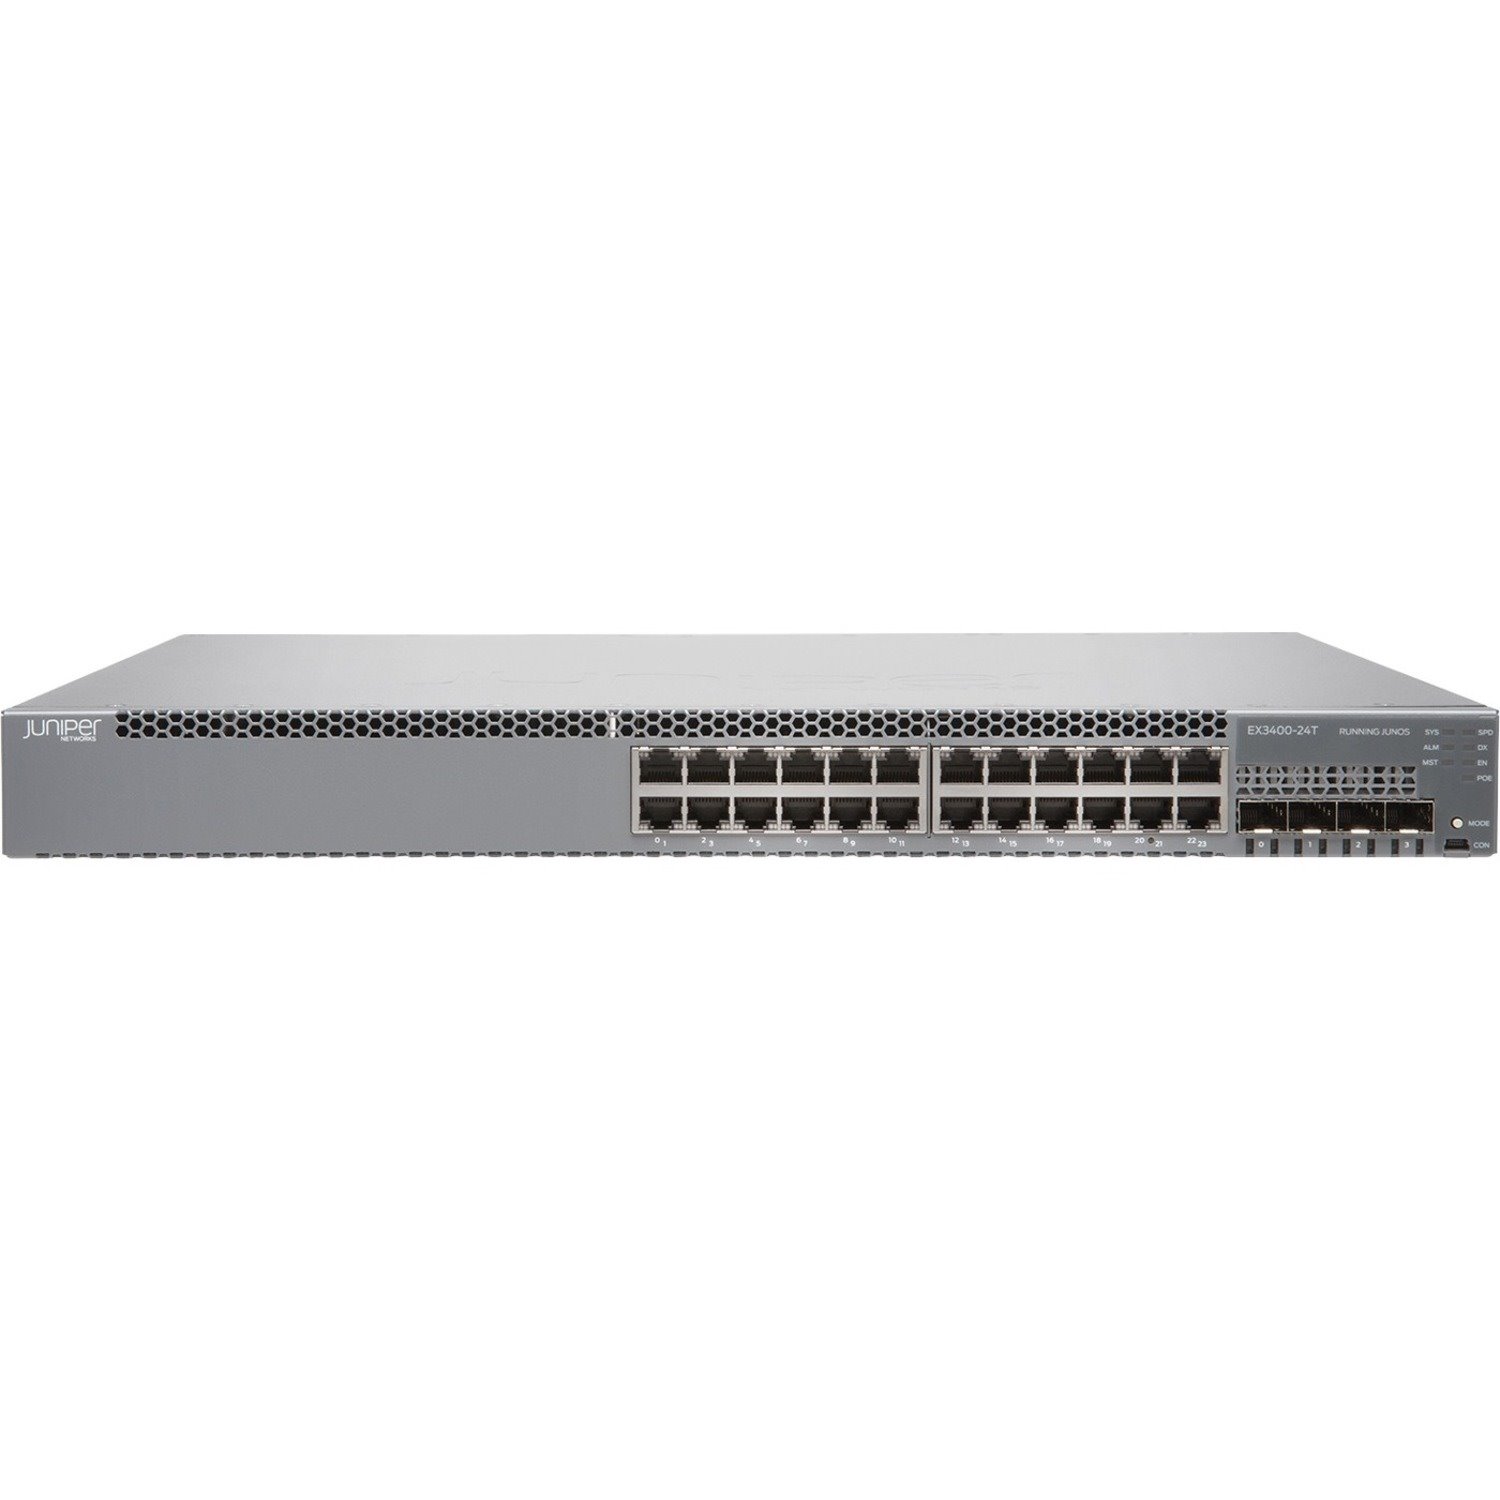 Juniper EX4300 EX3400-24T 24 Ports Manageable Ethernet Switch - Gigabit Ethernet, 40 Gigabit Ethernet, 10 Gigabit Ethernet - 1000Base-T, 10GBase-X, 40GBase-X